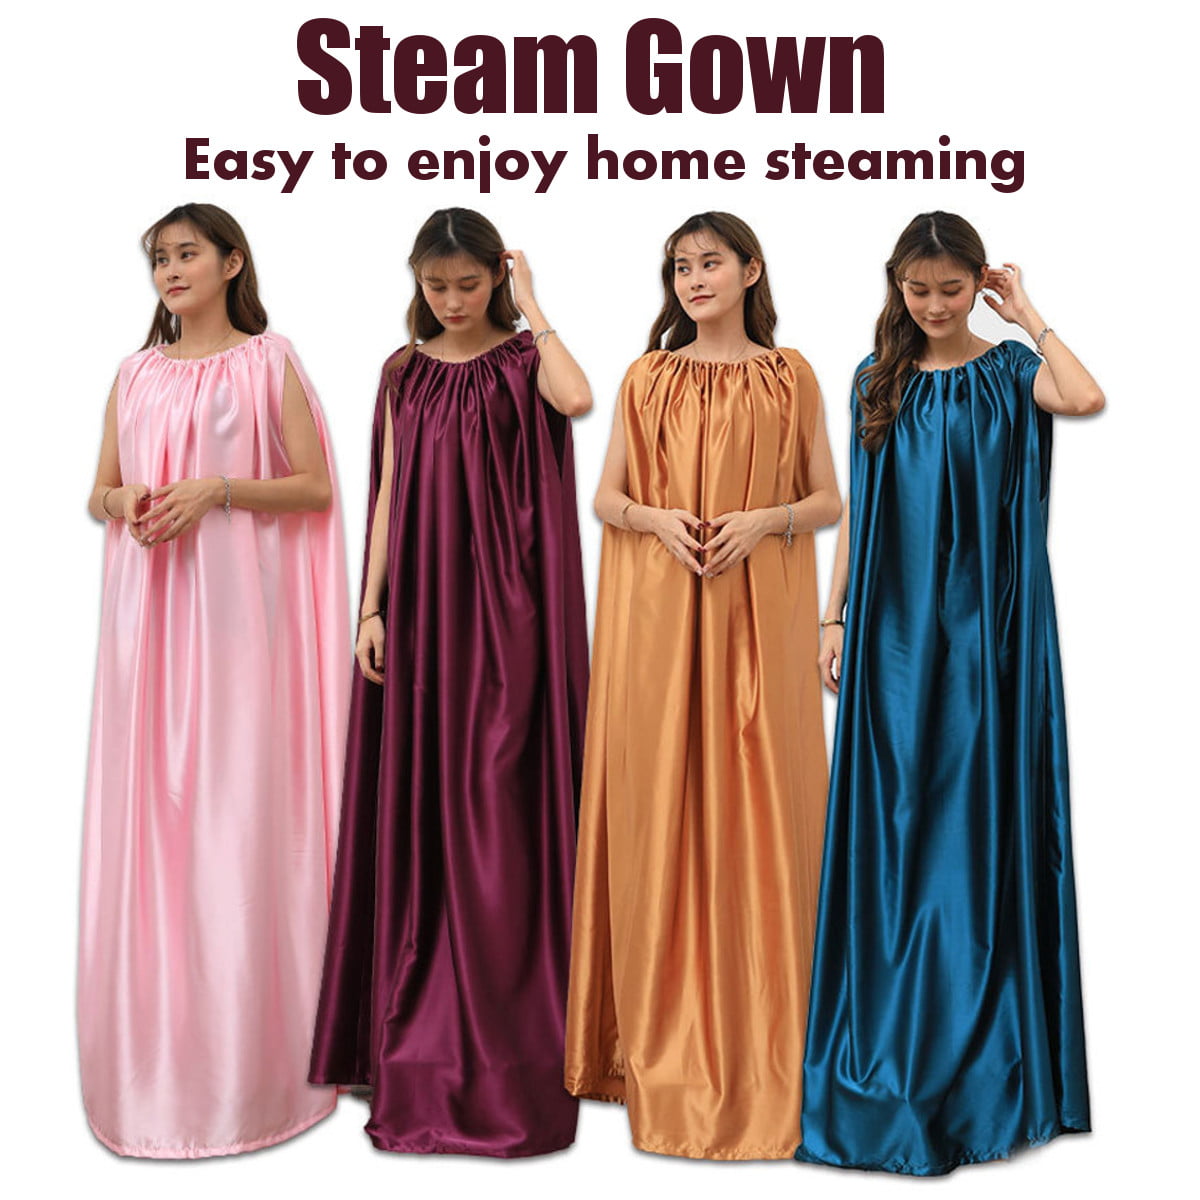 Full Body Cover Varies Colors Yoni  V-Steam GownRobe